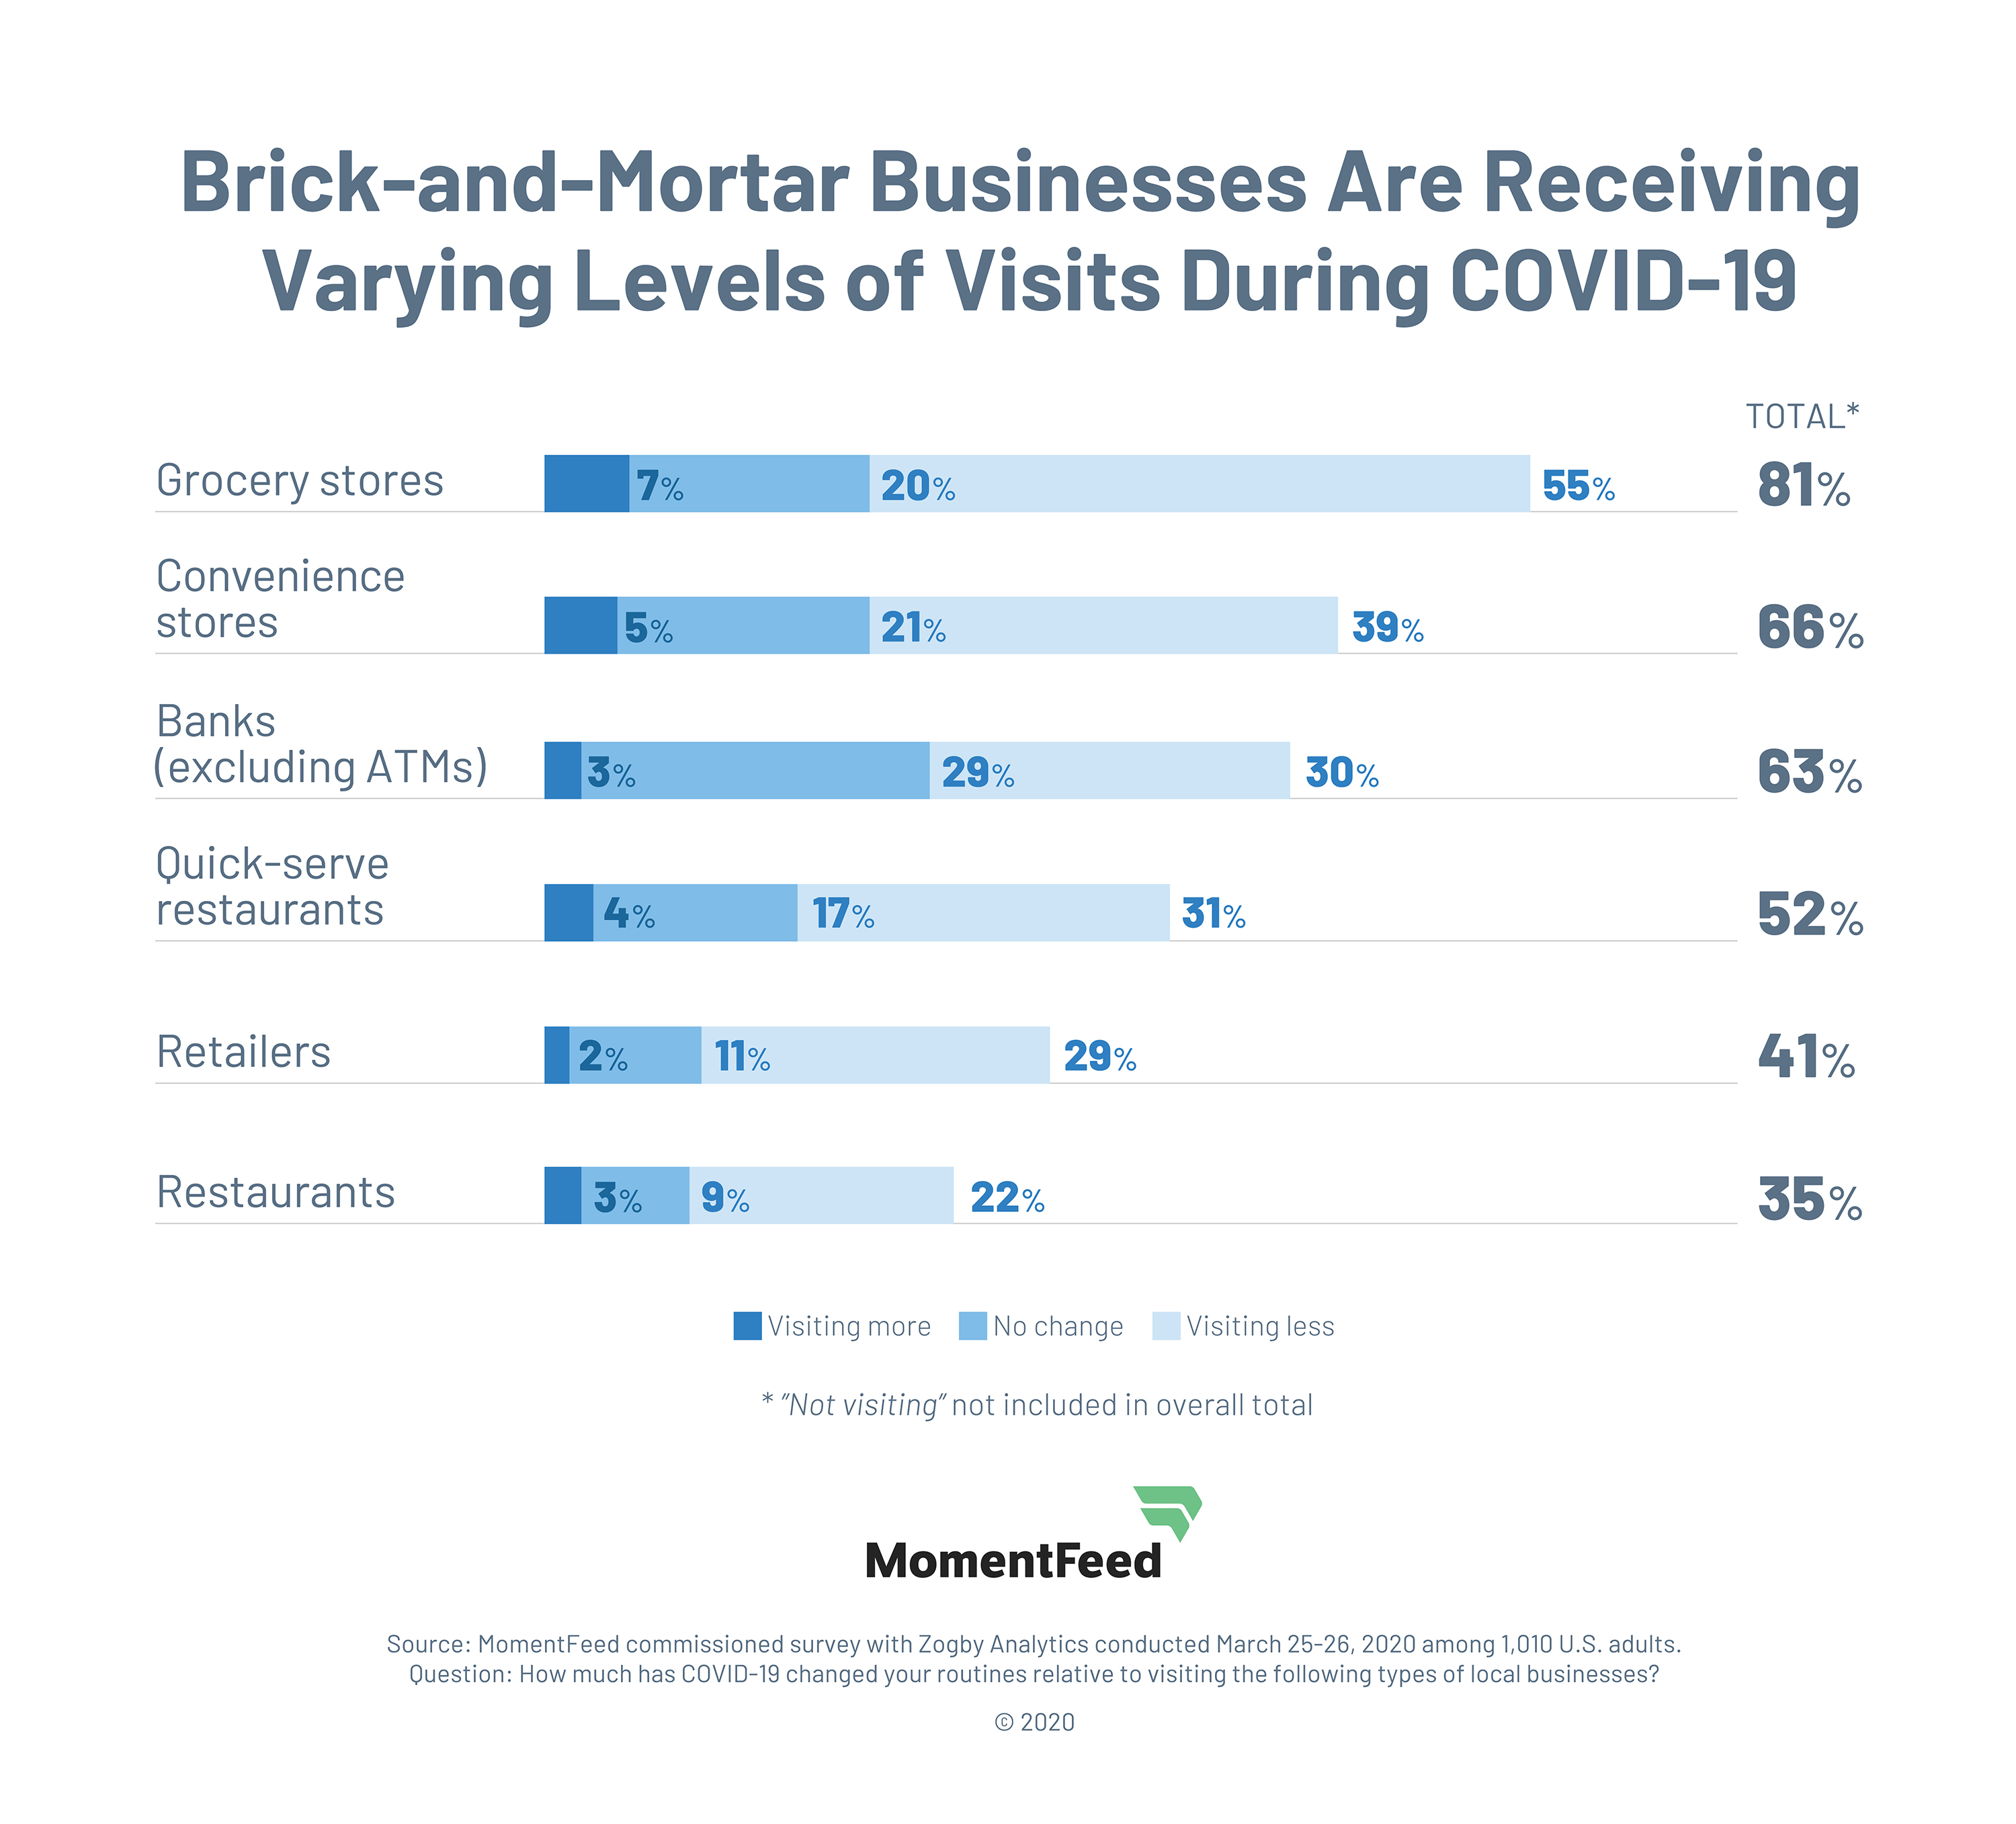 While the government has allowed brick-and-mortar businesses deemed “essential” to remain open, consumers are visiting these businesses less frequently than before COVID-19.